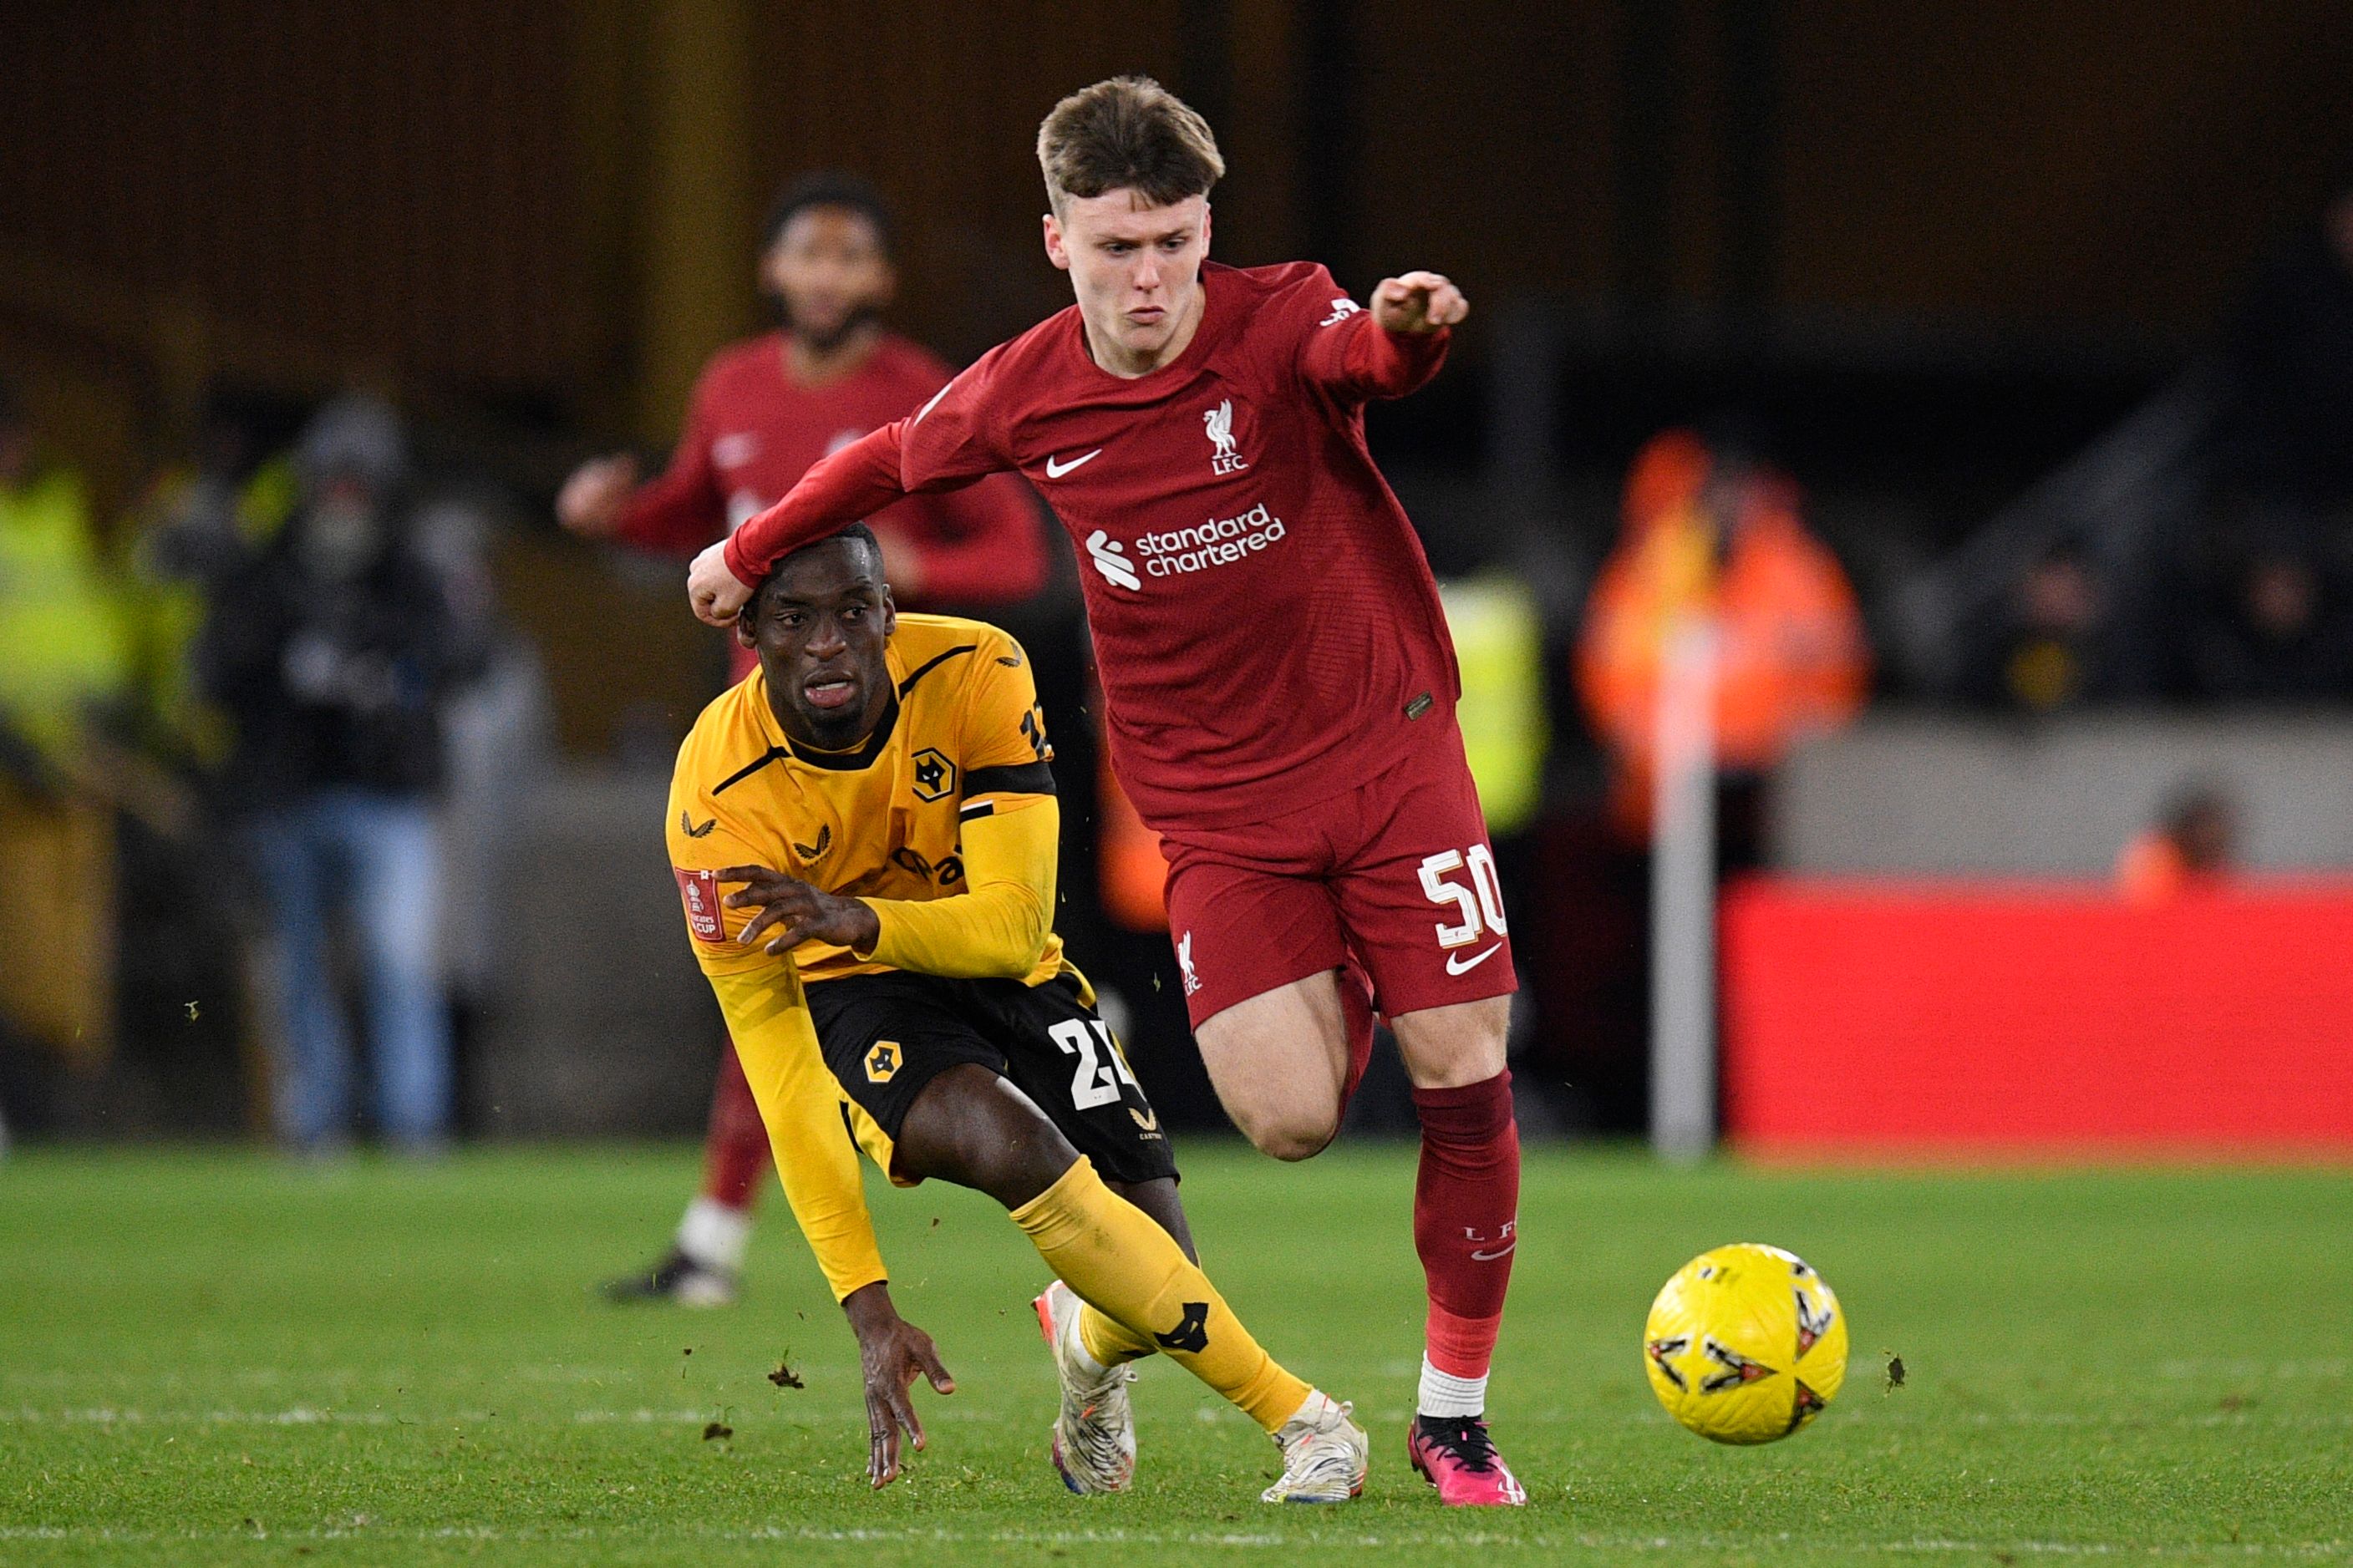 Liverpool among several EPL clubs eyeing up teenage gem in potential replica of Ben Doak swoop